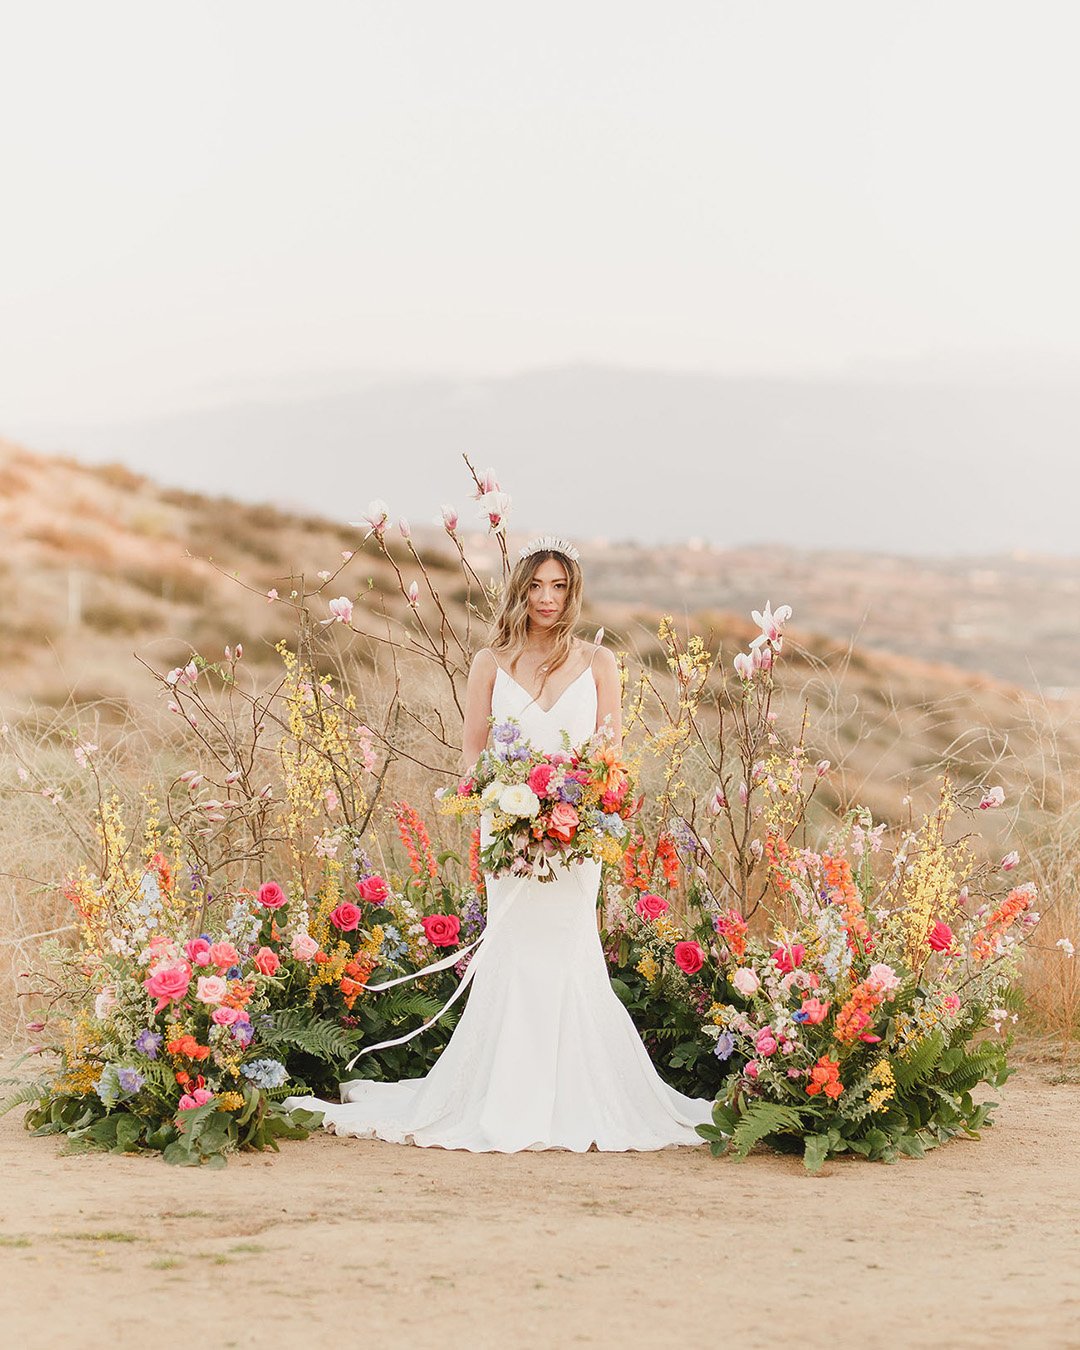 micro wedding venues altar in desert with flowers kristen booth